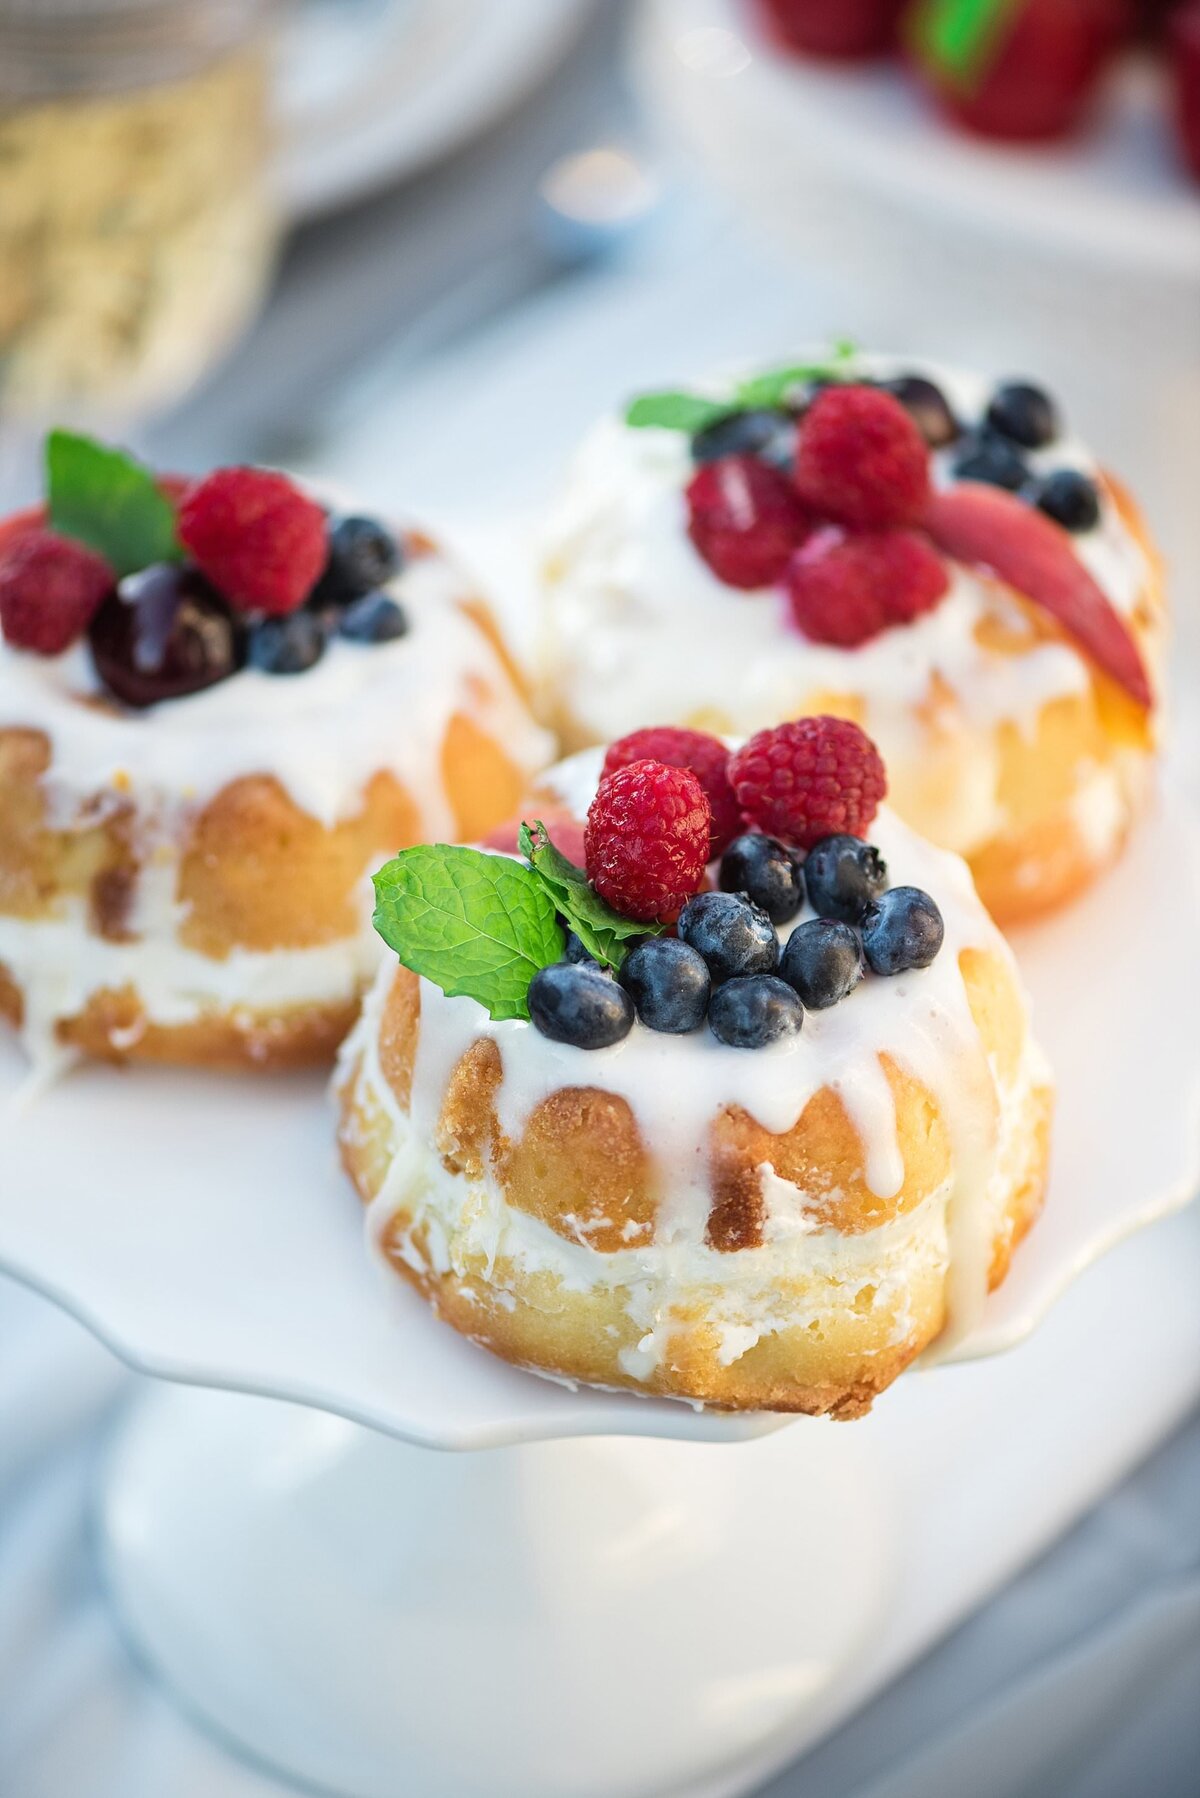 Cute mini bundt cakes with fresh berries and icing on top